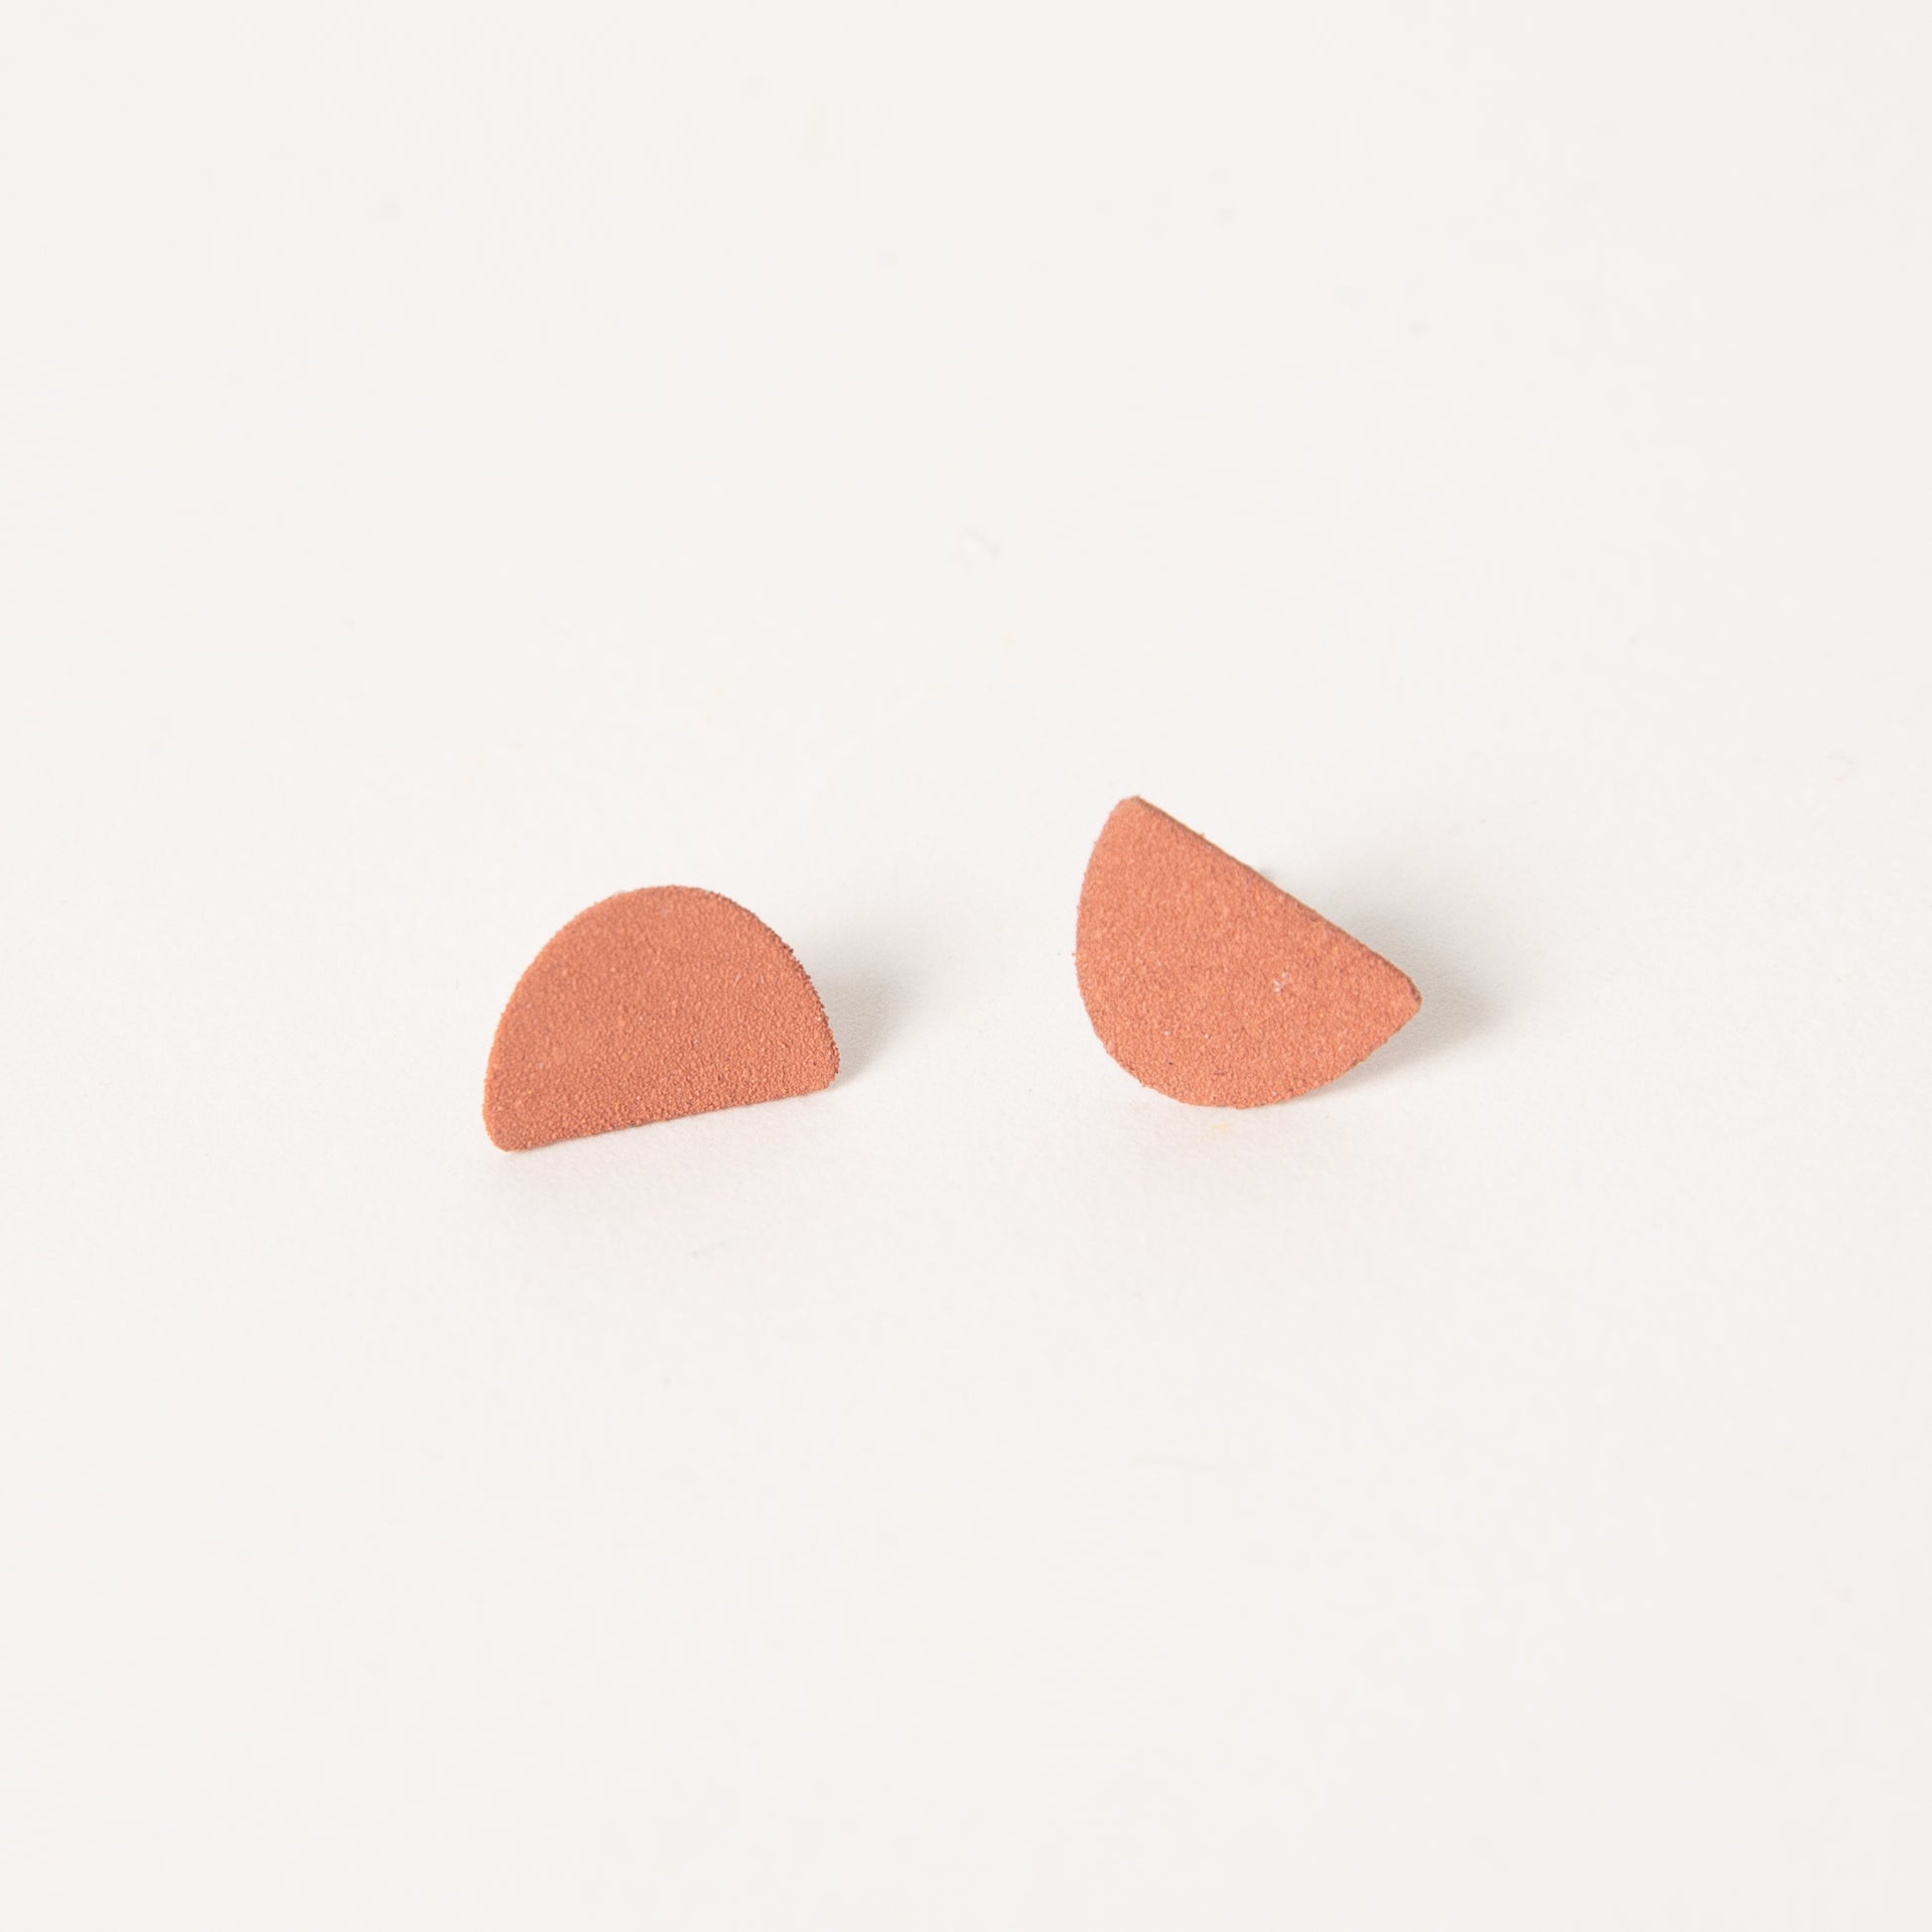 Mound earrings in coral.